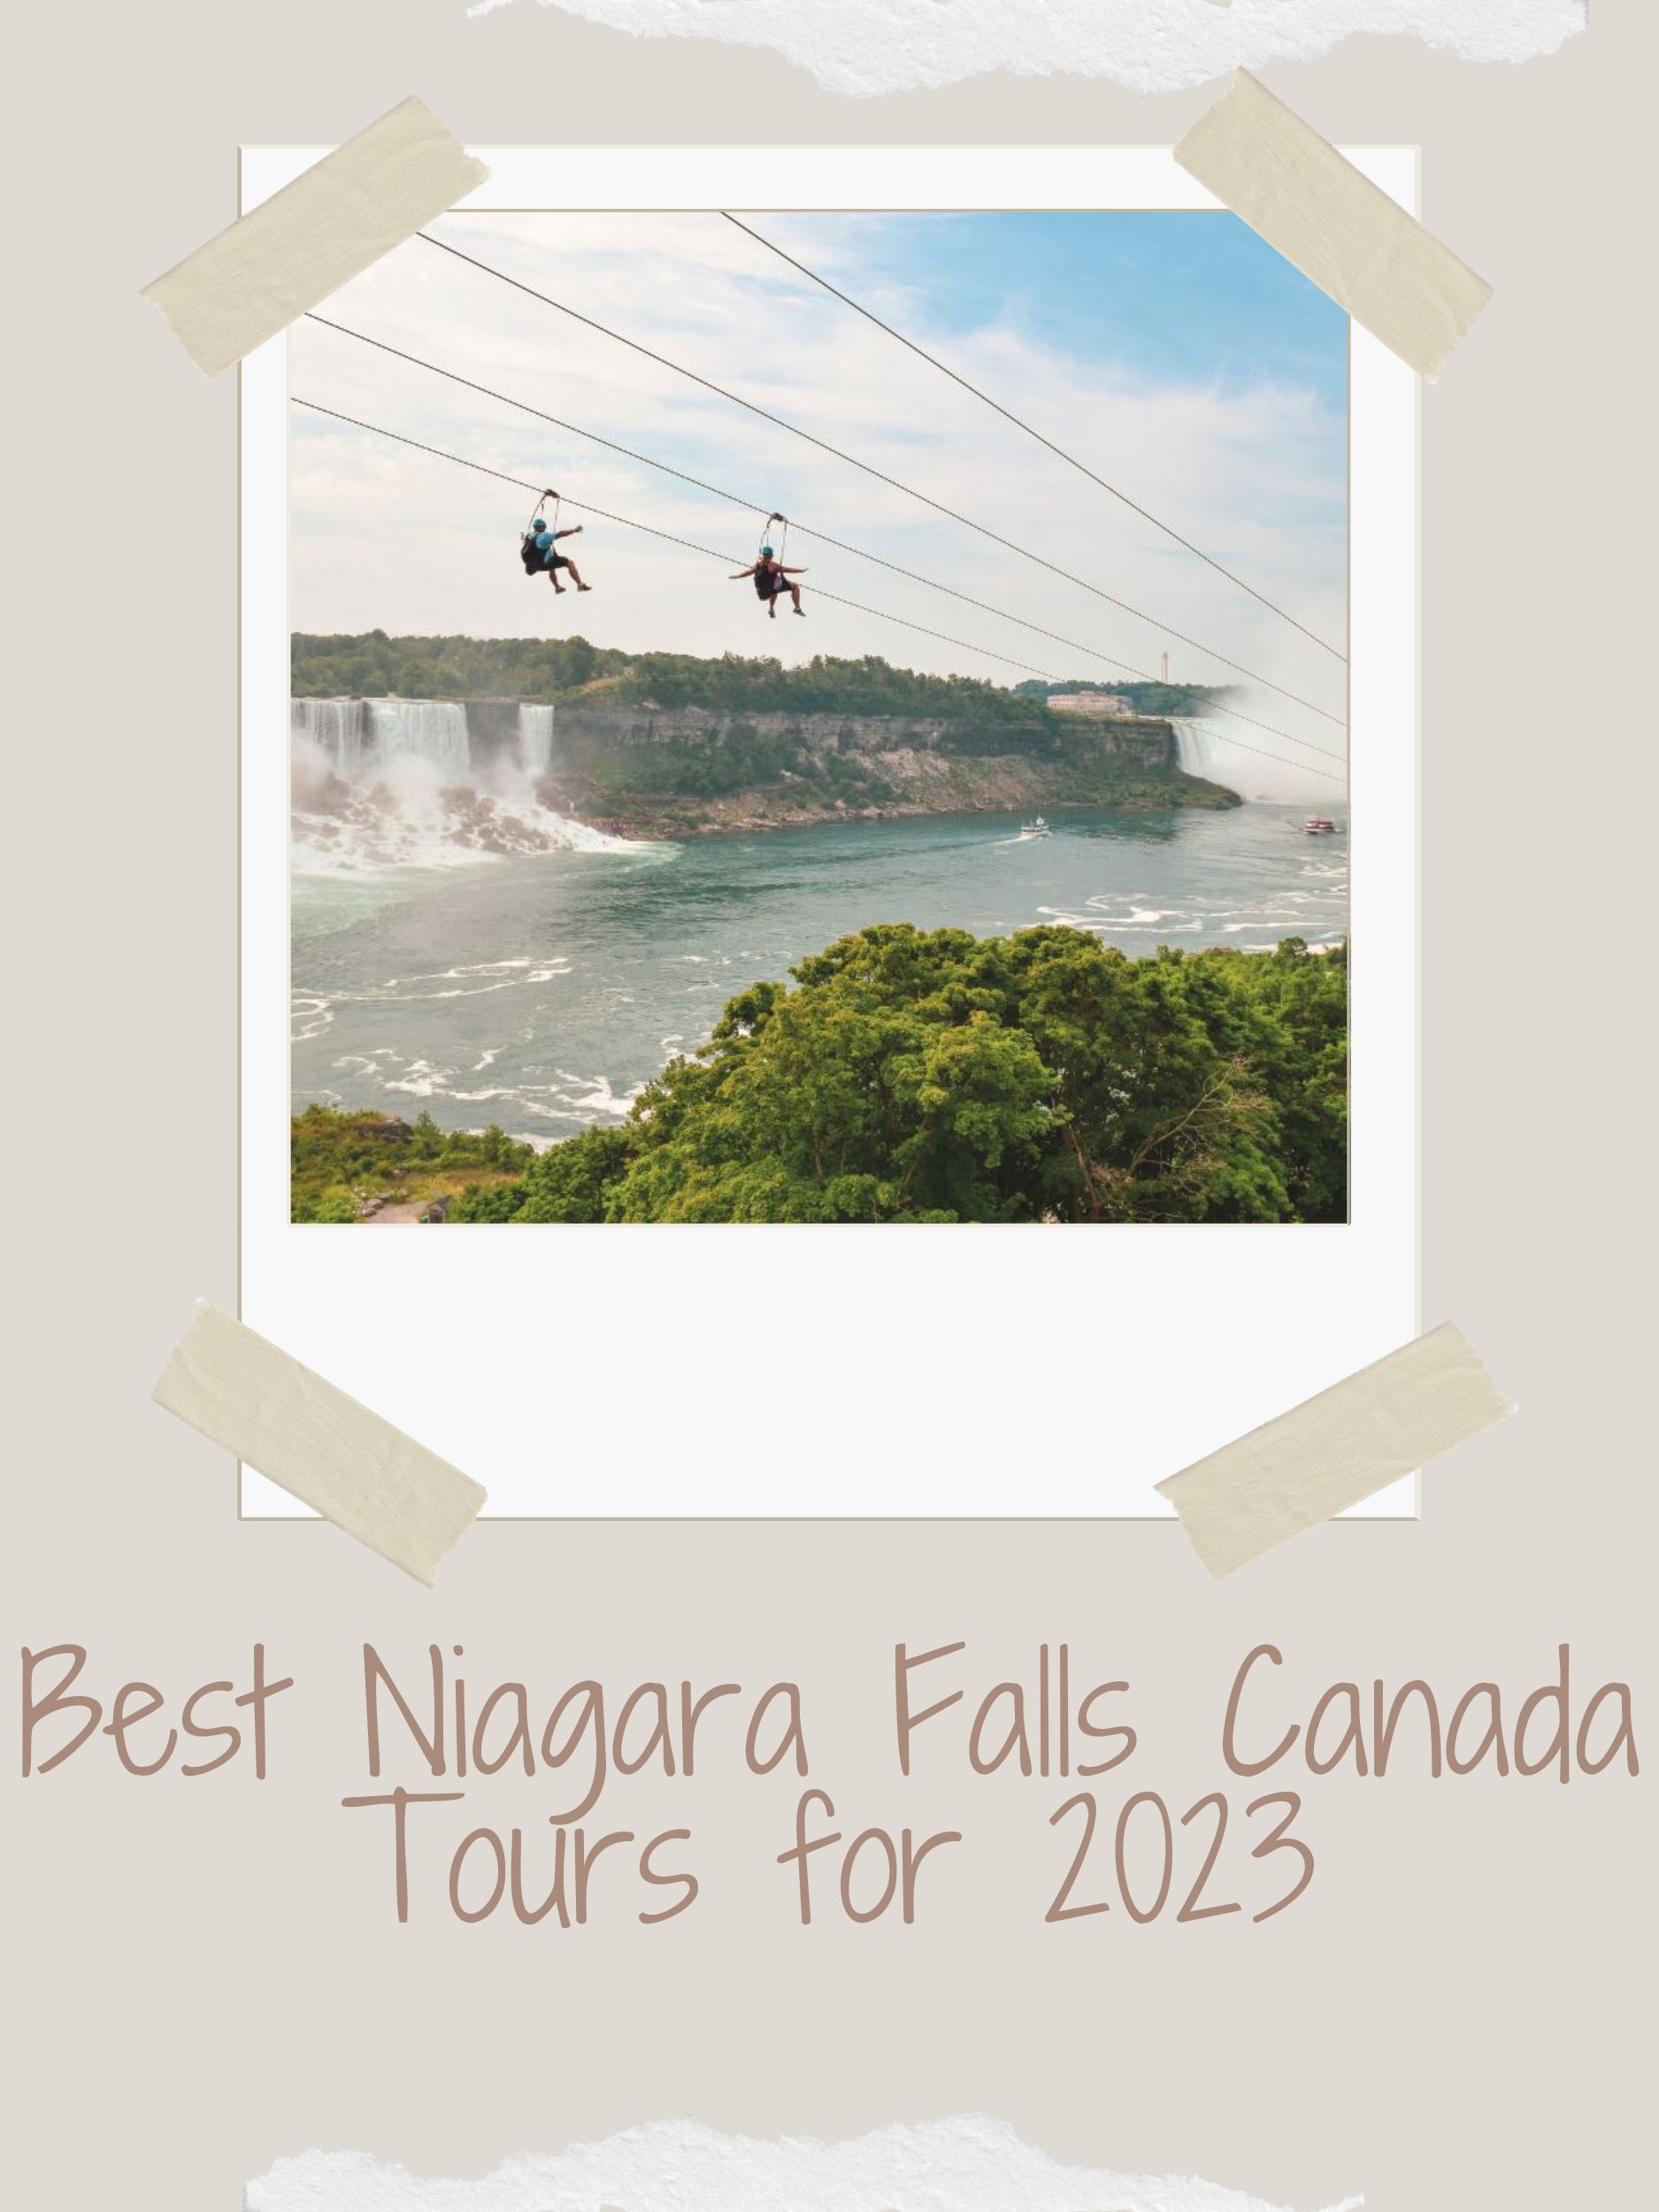 Best Tours in Niagara Falls Canada in 2023 (and Other Fun Things To Do)